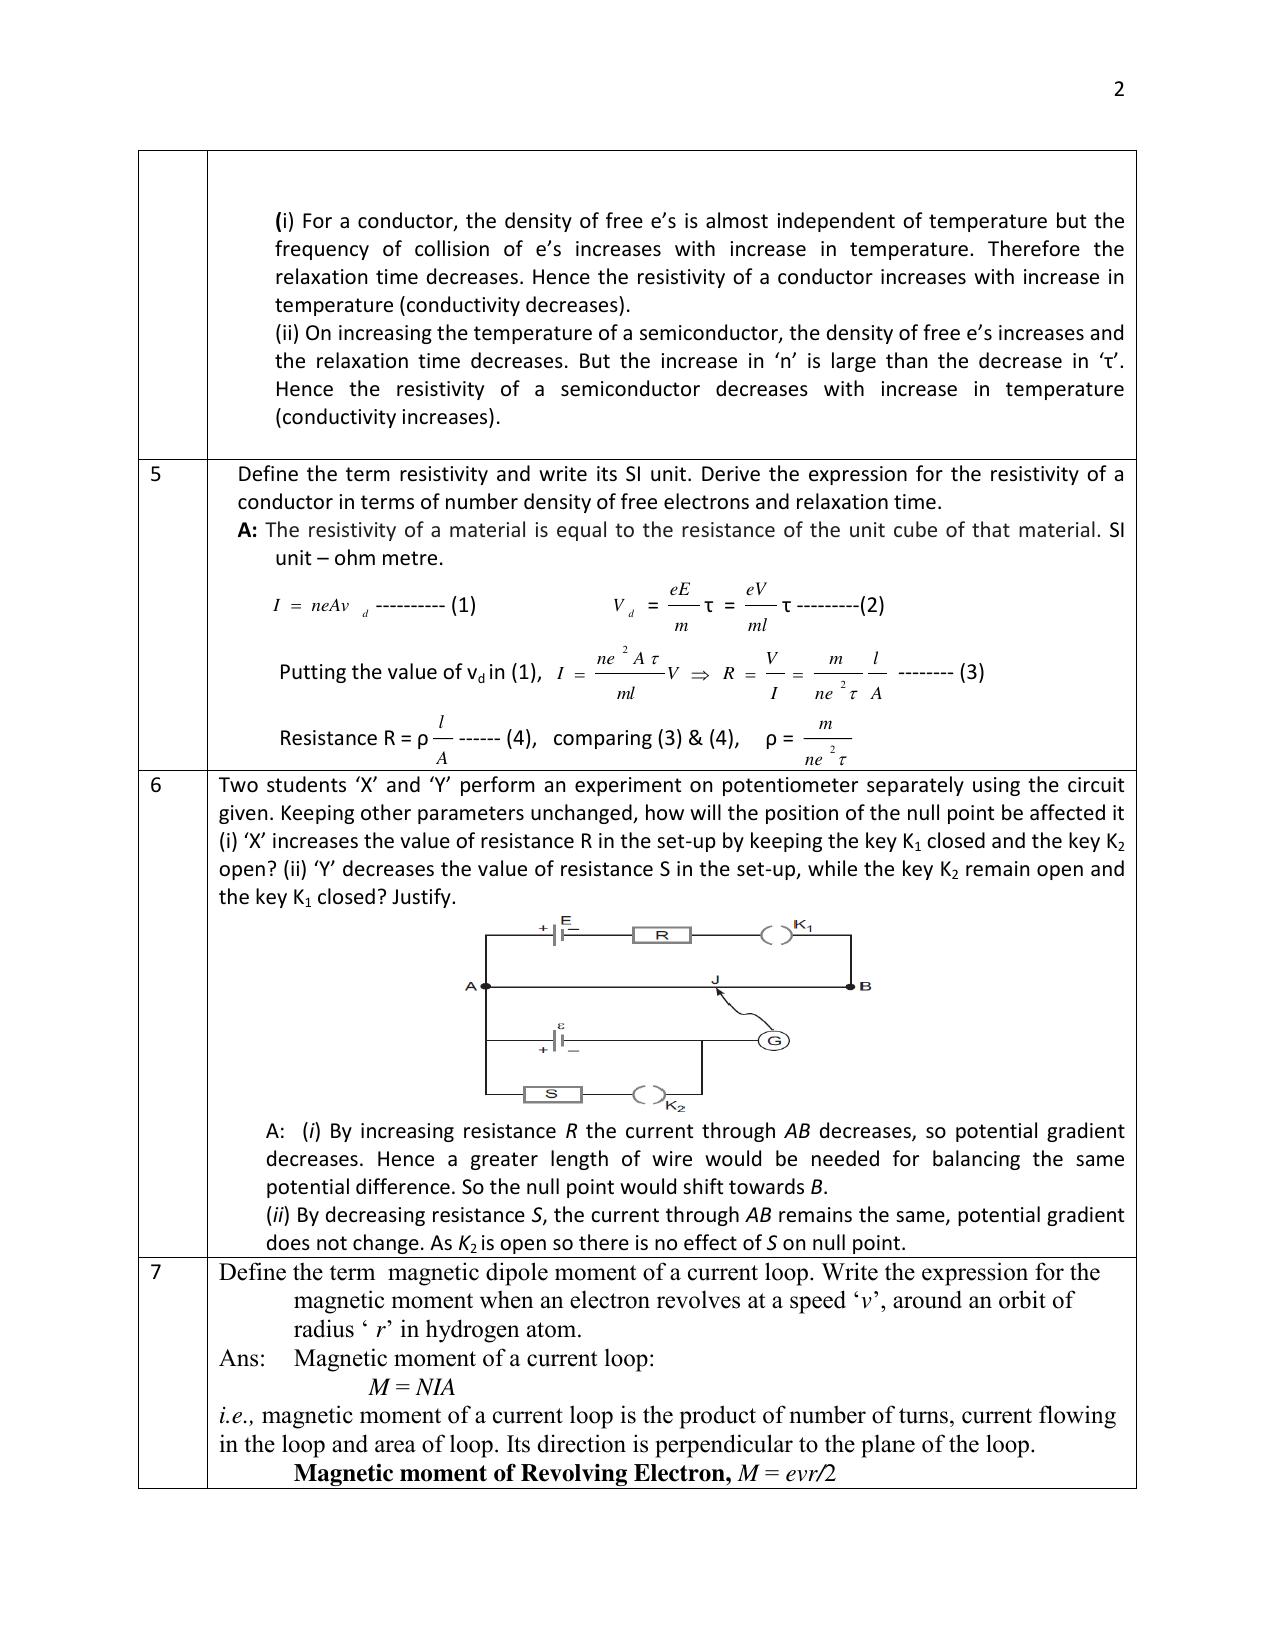 CBSE Class 12 Physics 1 mark Question Bank - 2 MARKS QUESTIONS - Page 2